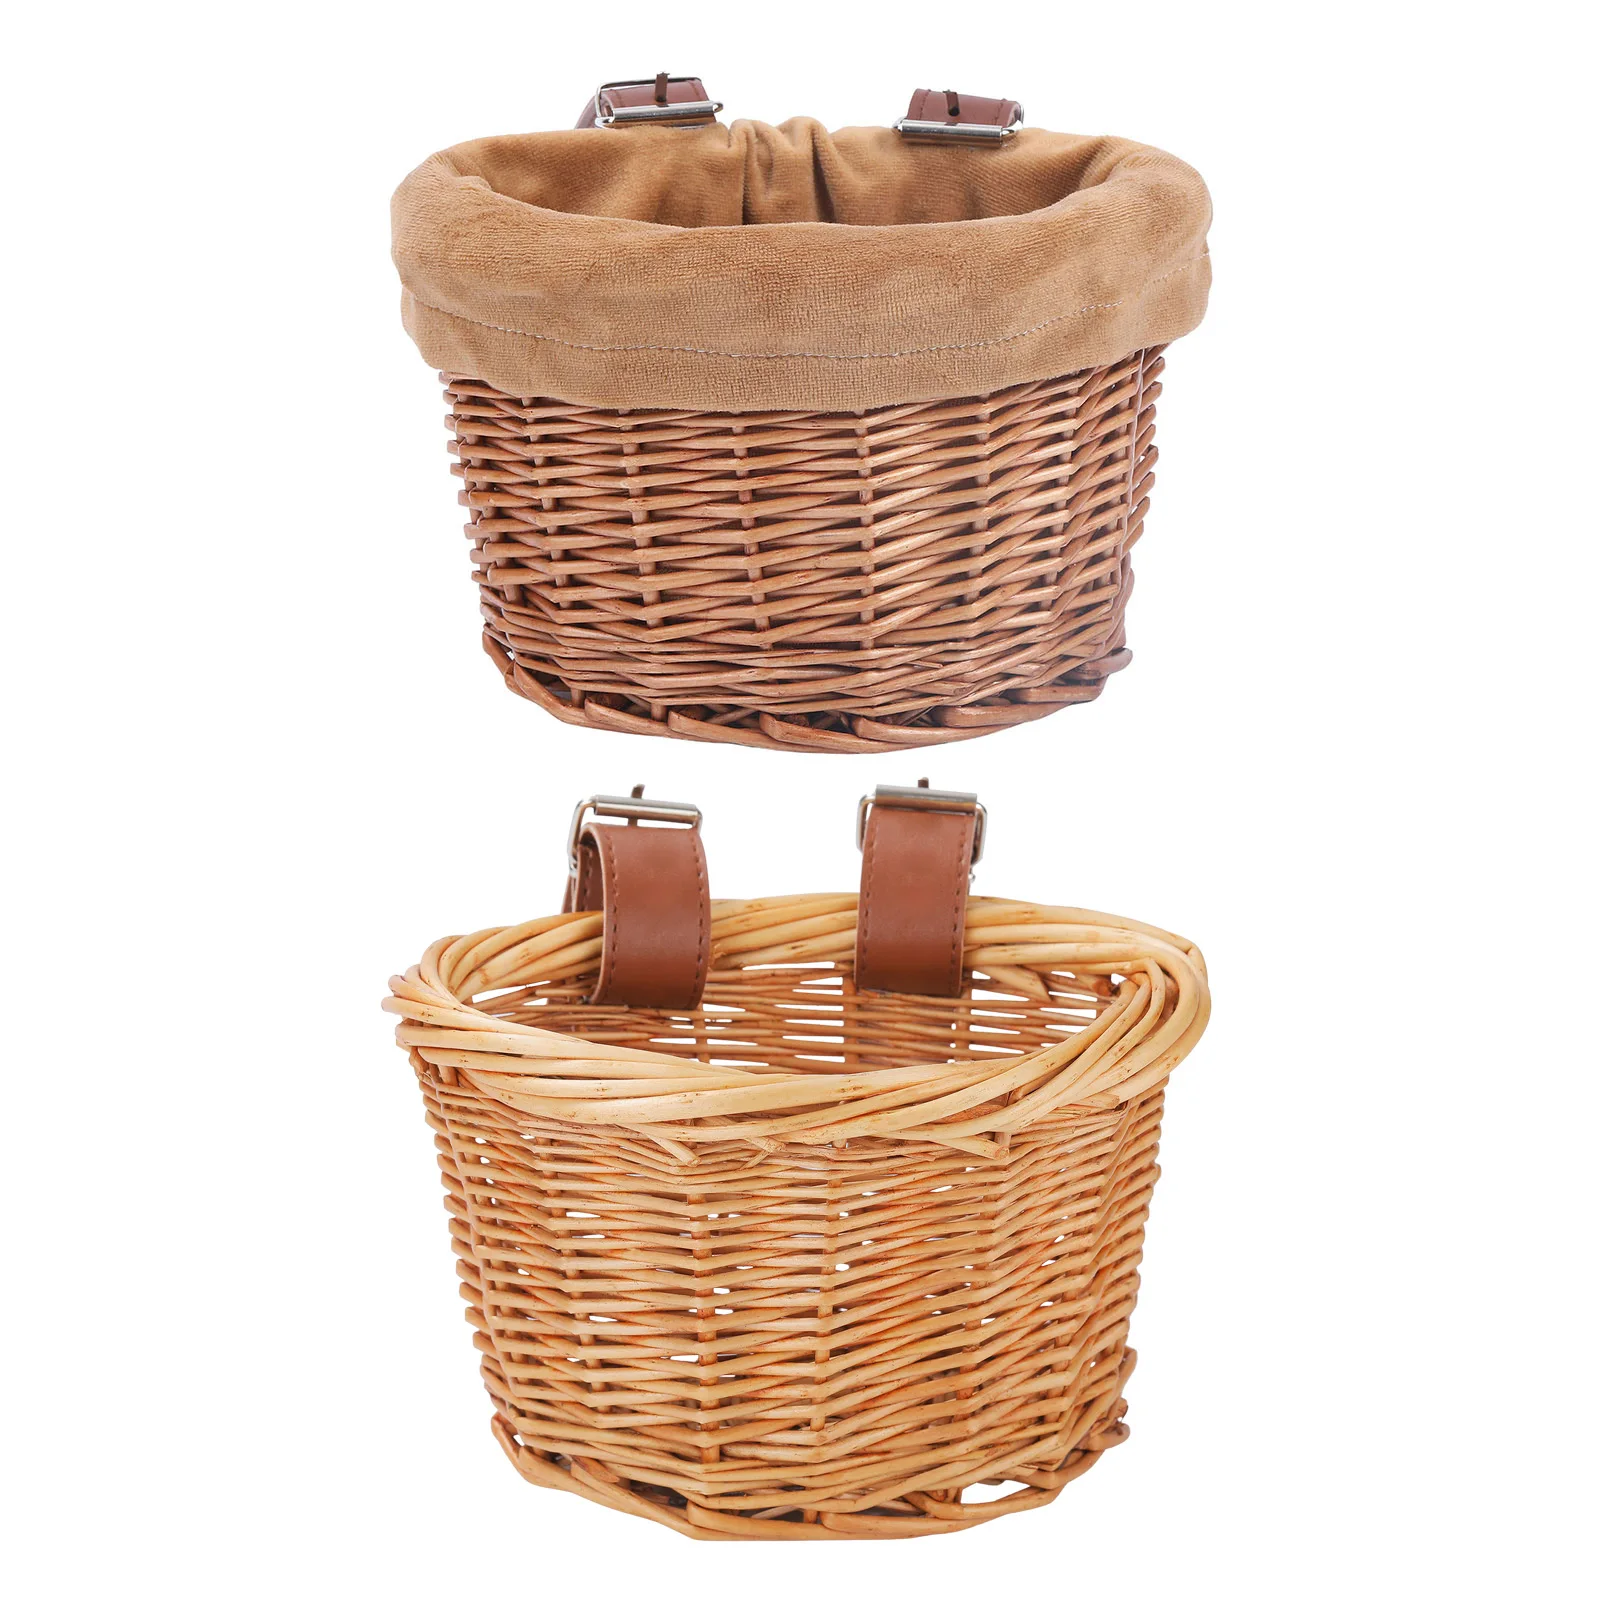 

Bicycle Basket for Kids Bike Scooter Baskets with 2 Leather Straps Detachable Wicker D-shaped Waterproof Handmade Storage Basket